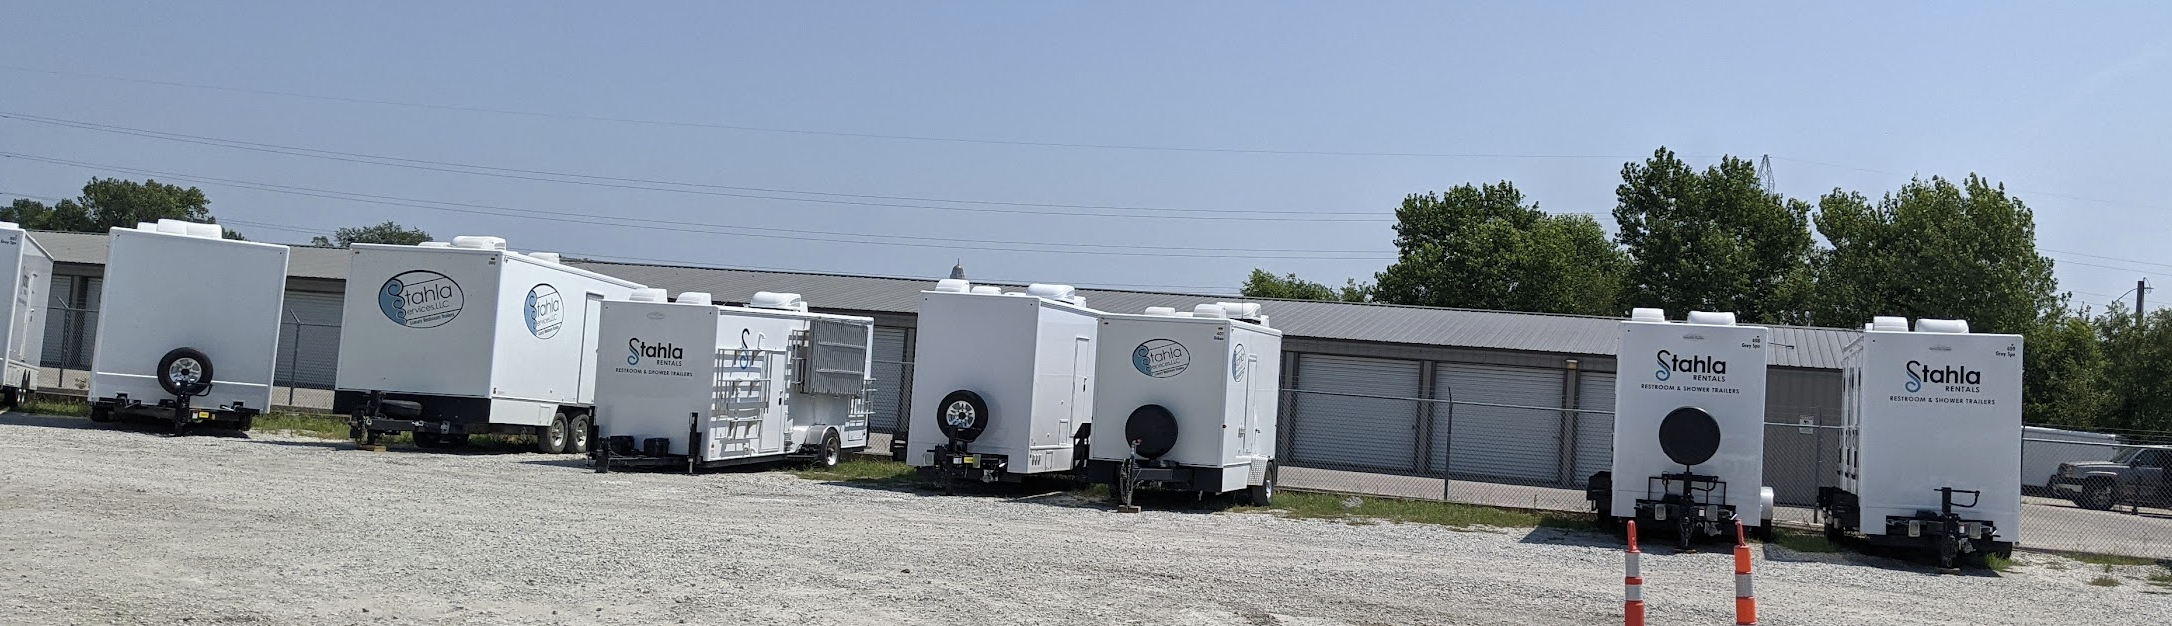 Shower and Restroom Trailer Rentals 1683046831 Screenshot 2023 05 01 at 11.21.46 AM - Renting a Restroom and Shower Trailer in Omaha NE: What You Need to Know